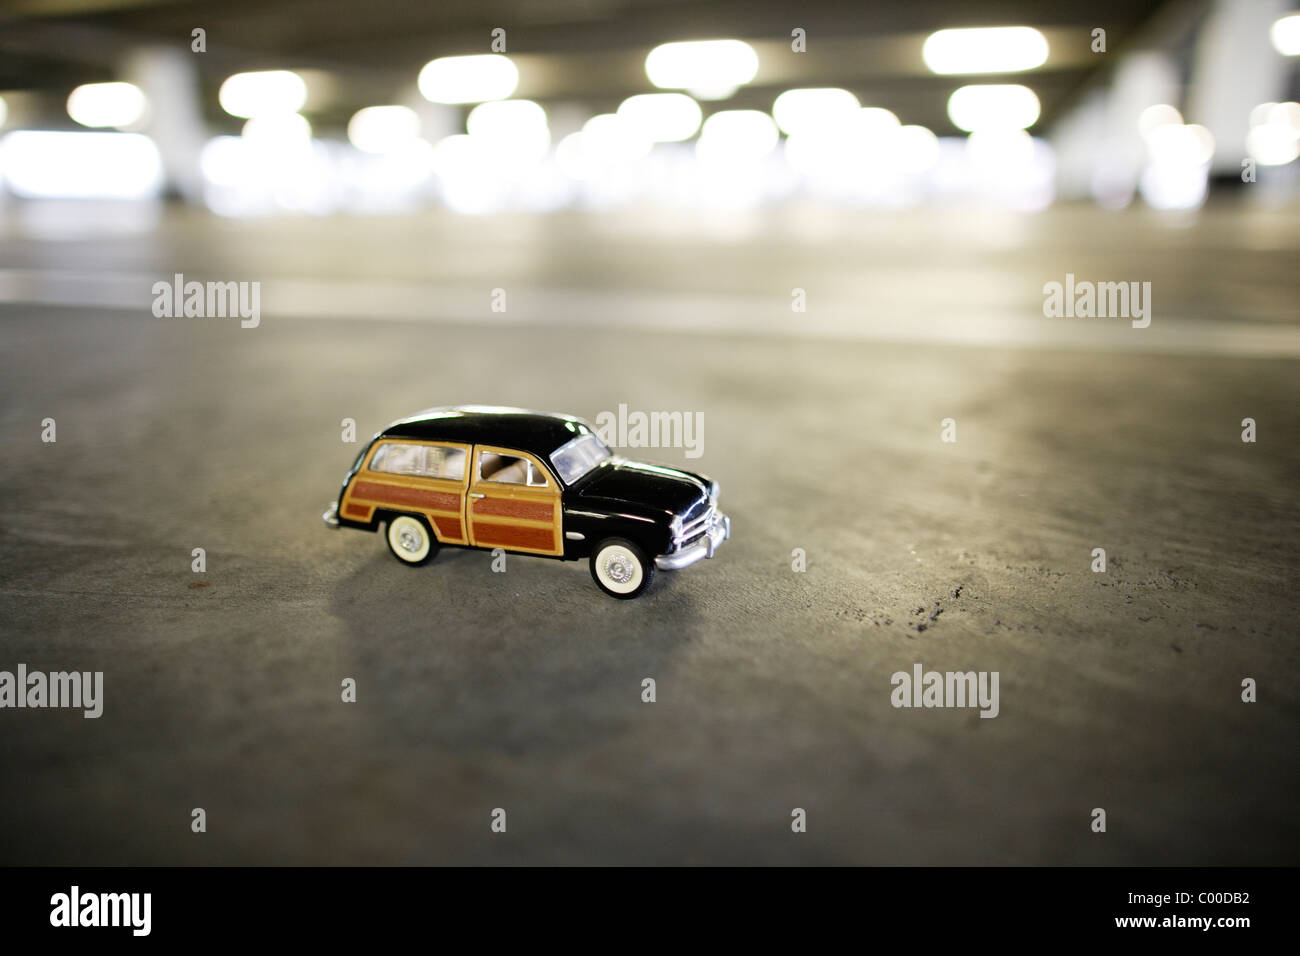 Toy car in empty car park. Stock Photo